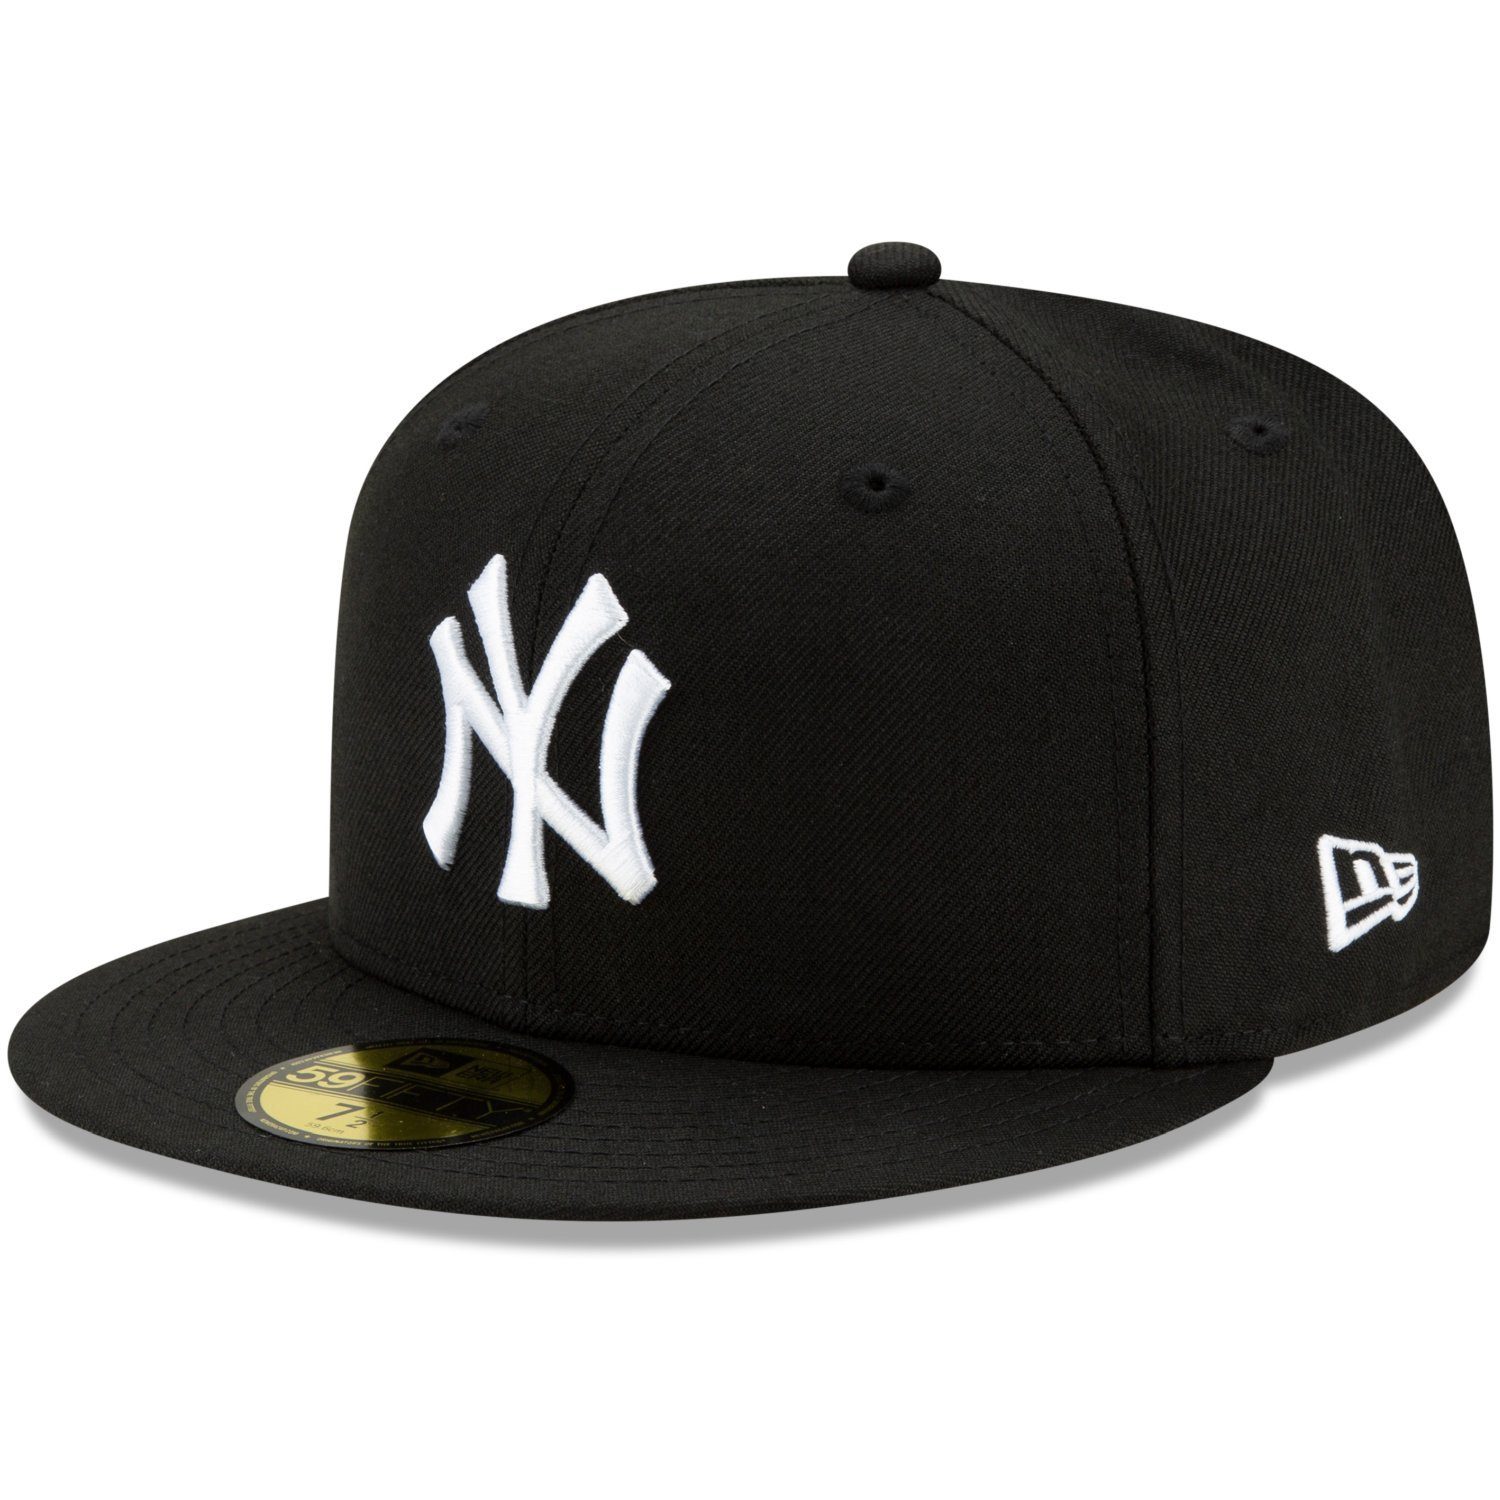 New LIFESTYLE York Cap 59Fifty Fitted Yankees Era New